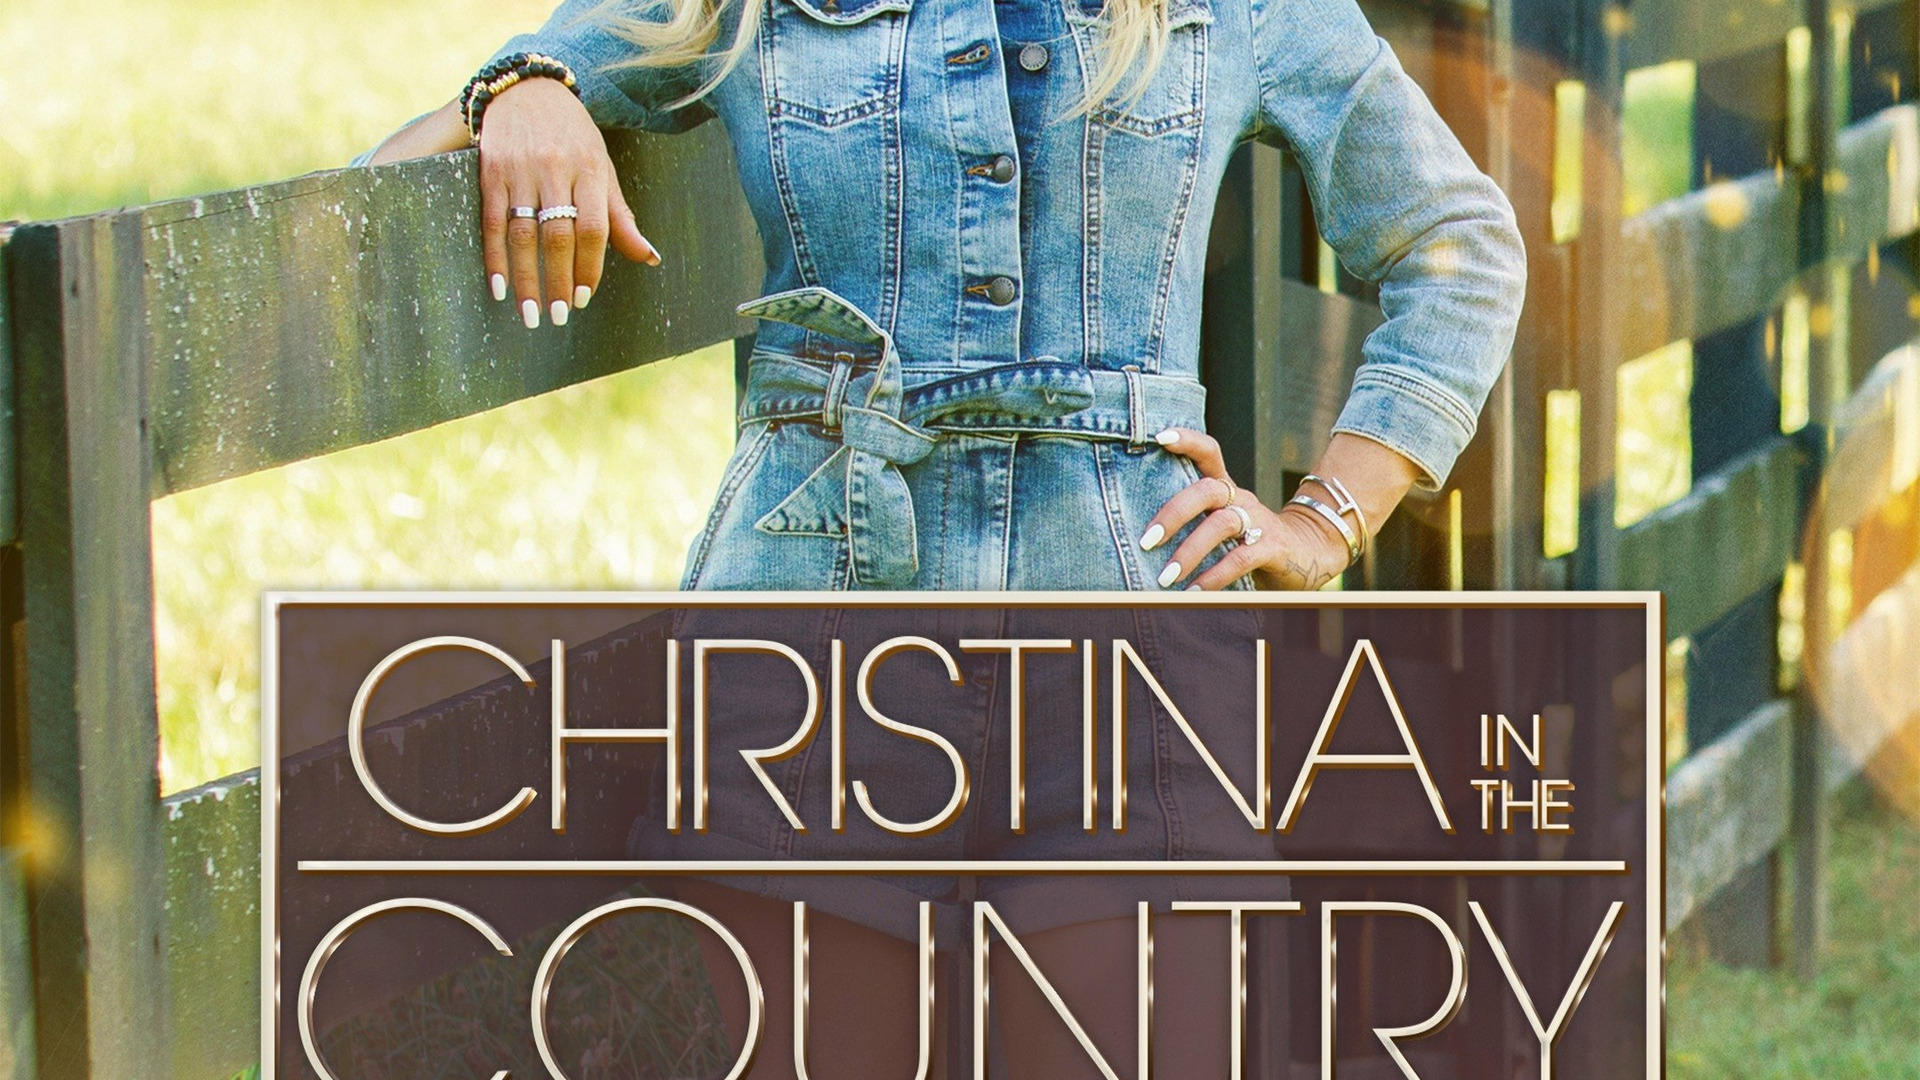 Show Christina in the Country